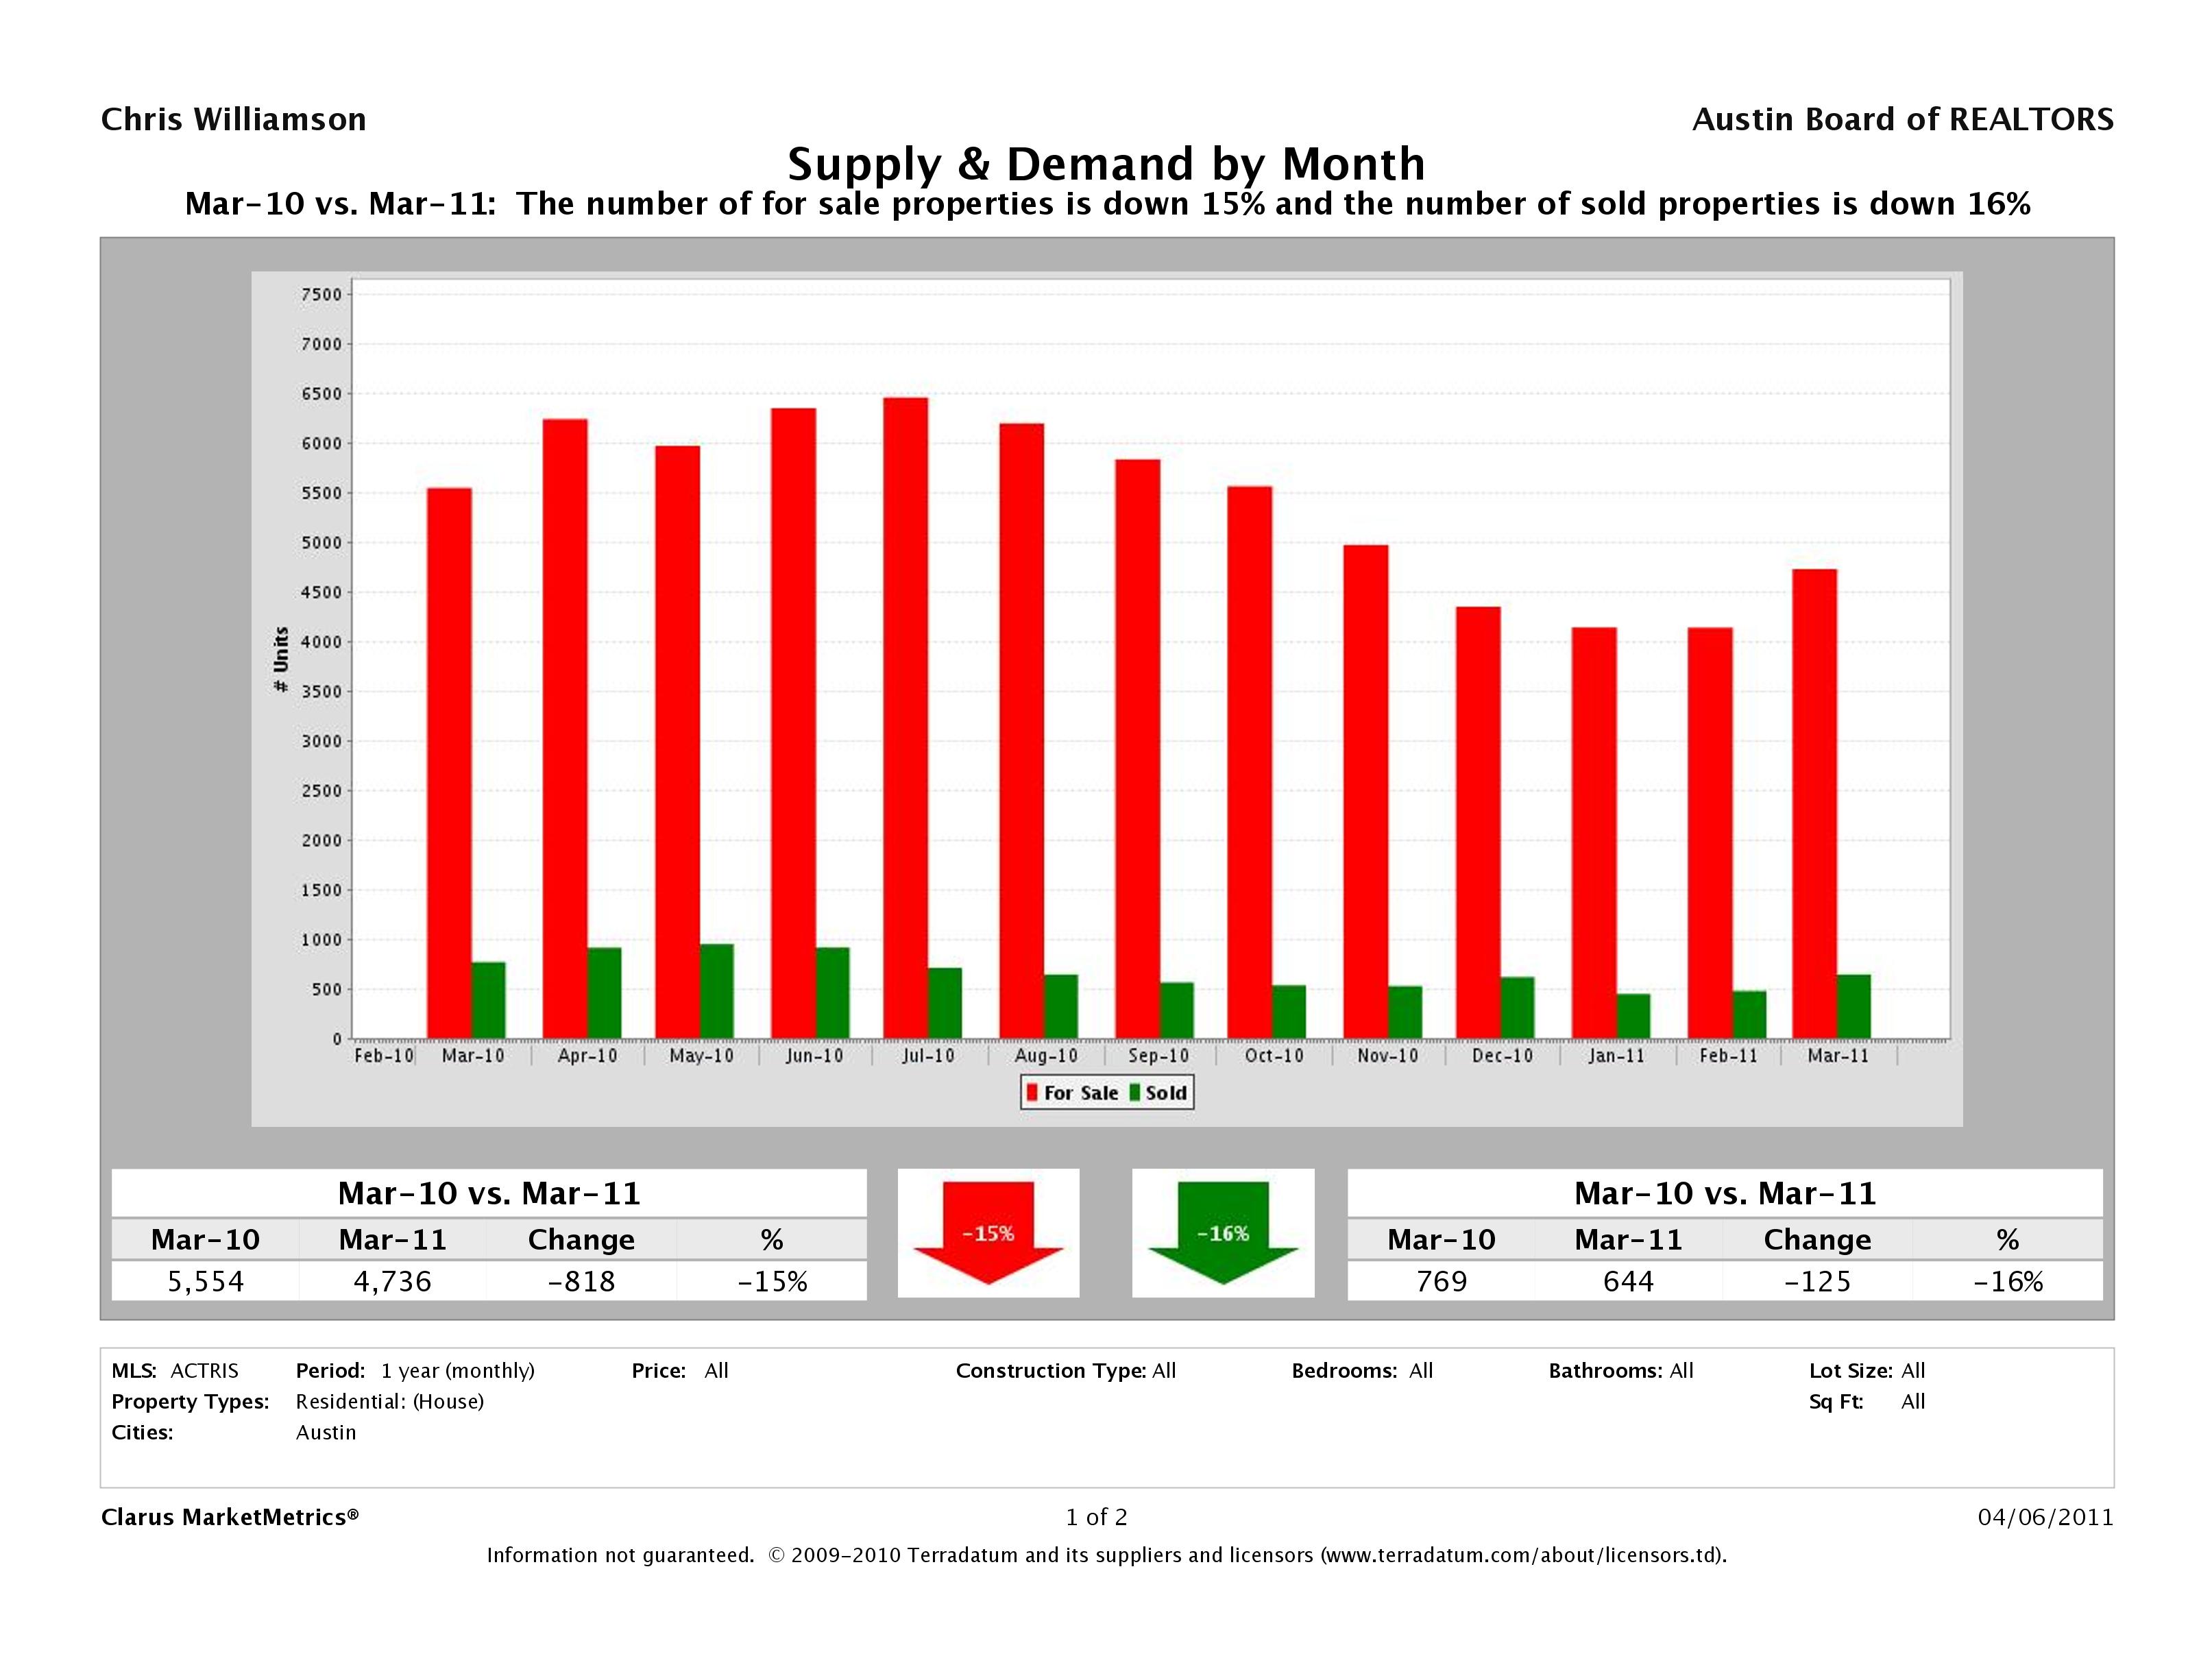 Austin real estate market supply and demand march 2011